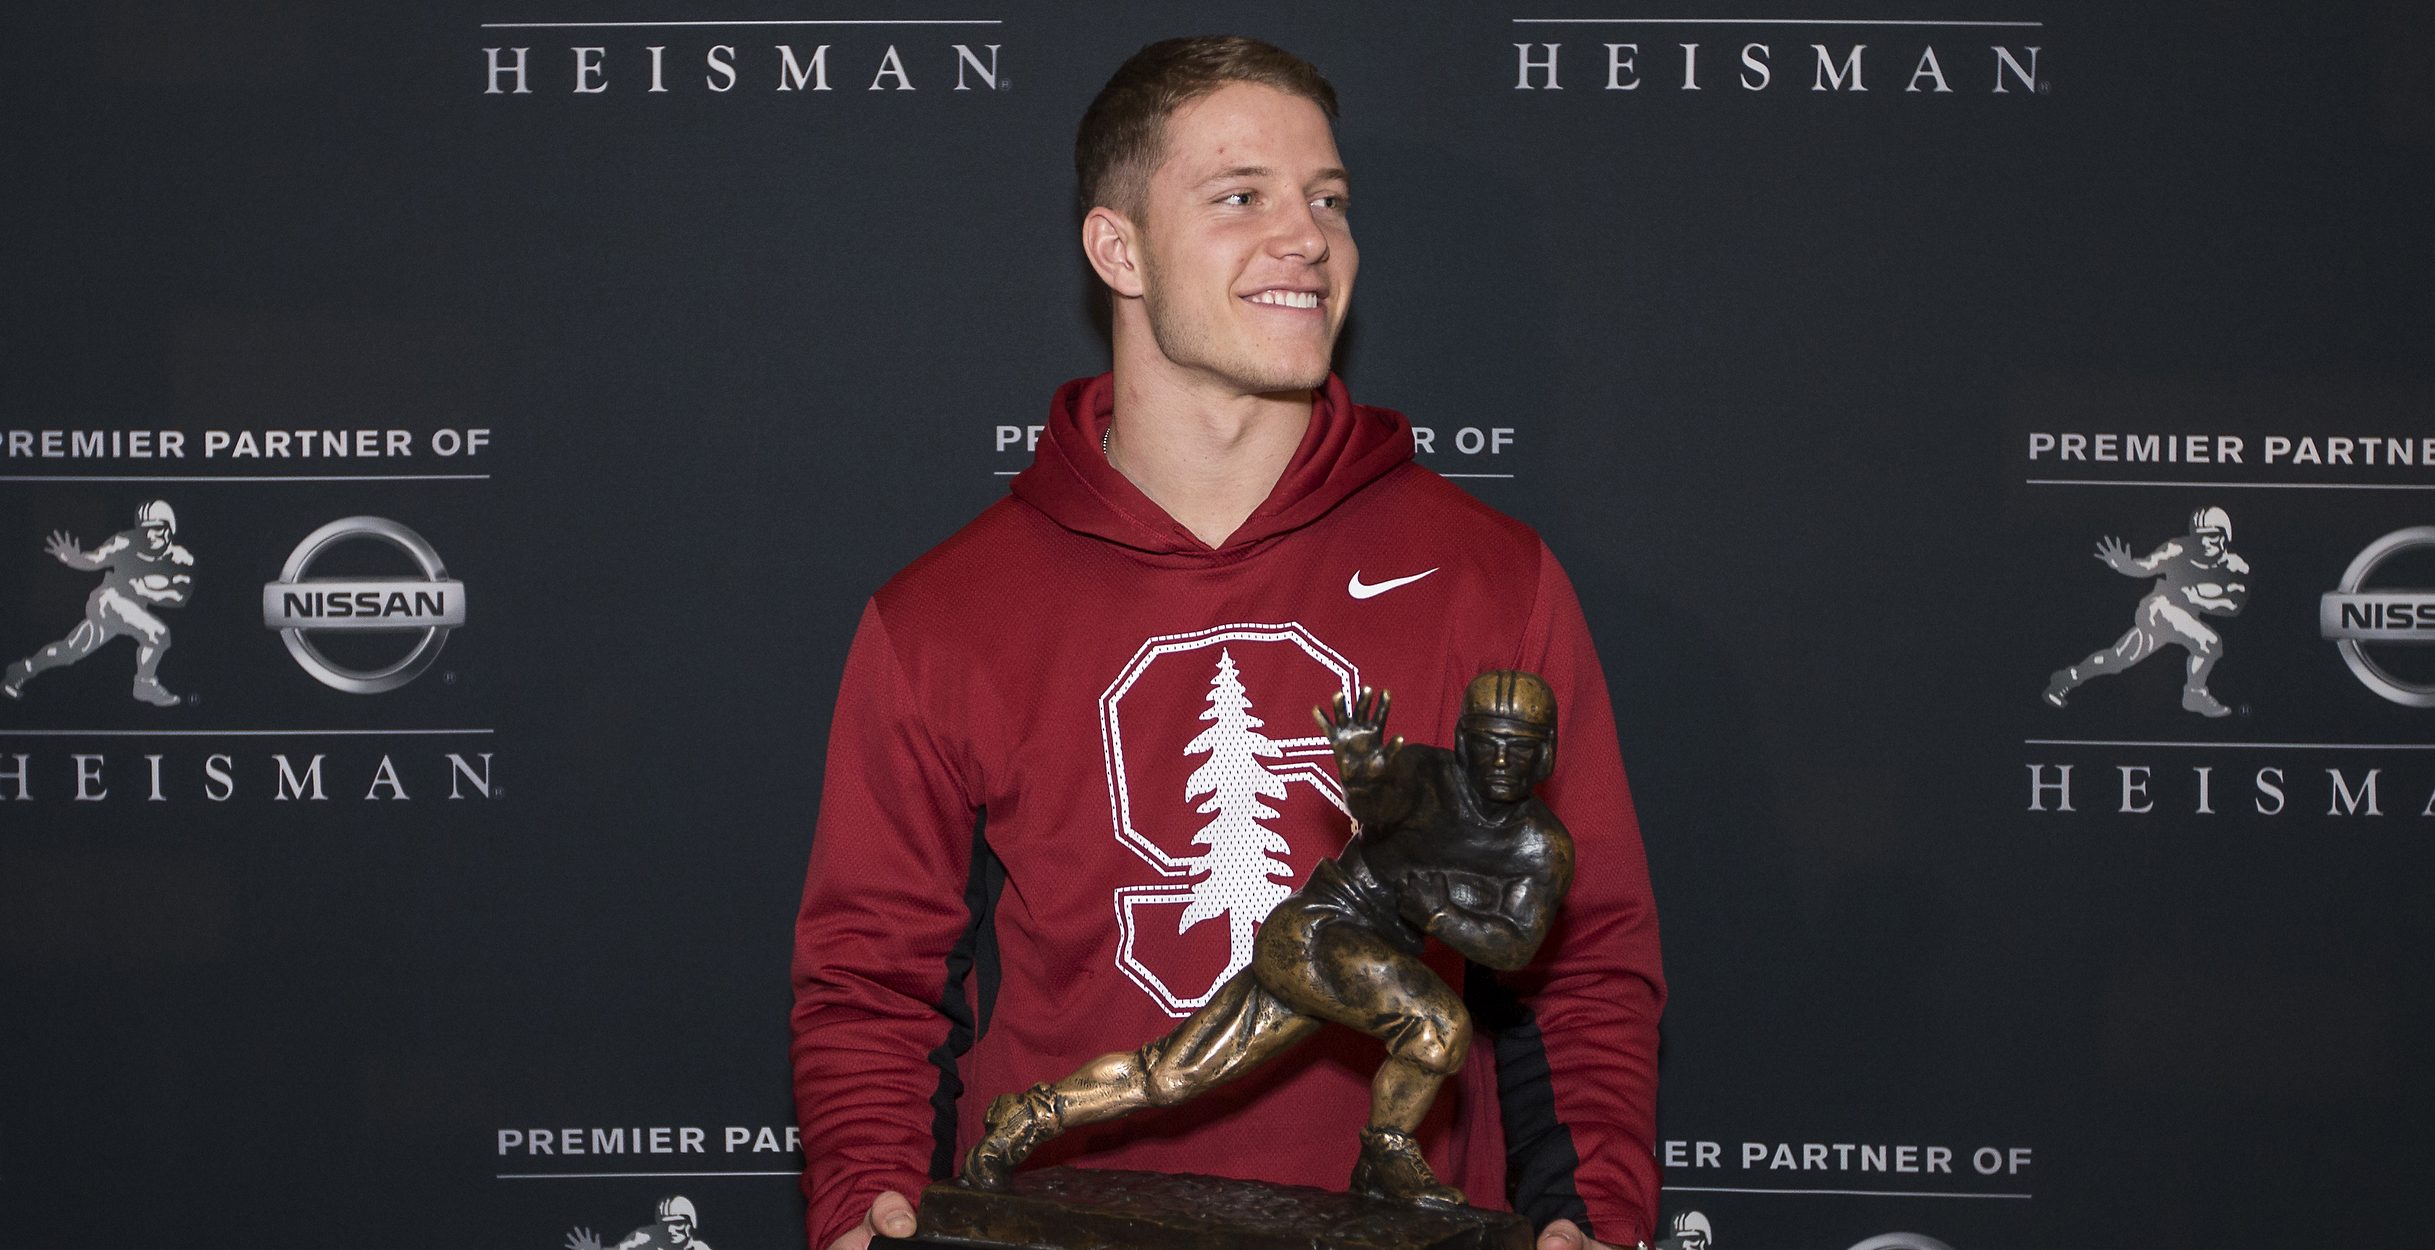 NEW YORK - DECEMBER 11: Heisman finalist Christian McCaffery, running back for Stanford University poses with the Heisman Trophy during media availability on December 11, 2015 at the Marriott Marquis in New York City. NOTE TO USER: Photographer approval needed for all Commercial License requests.